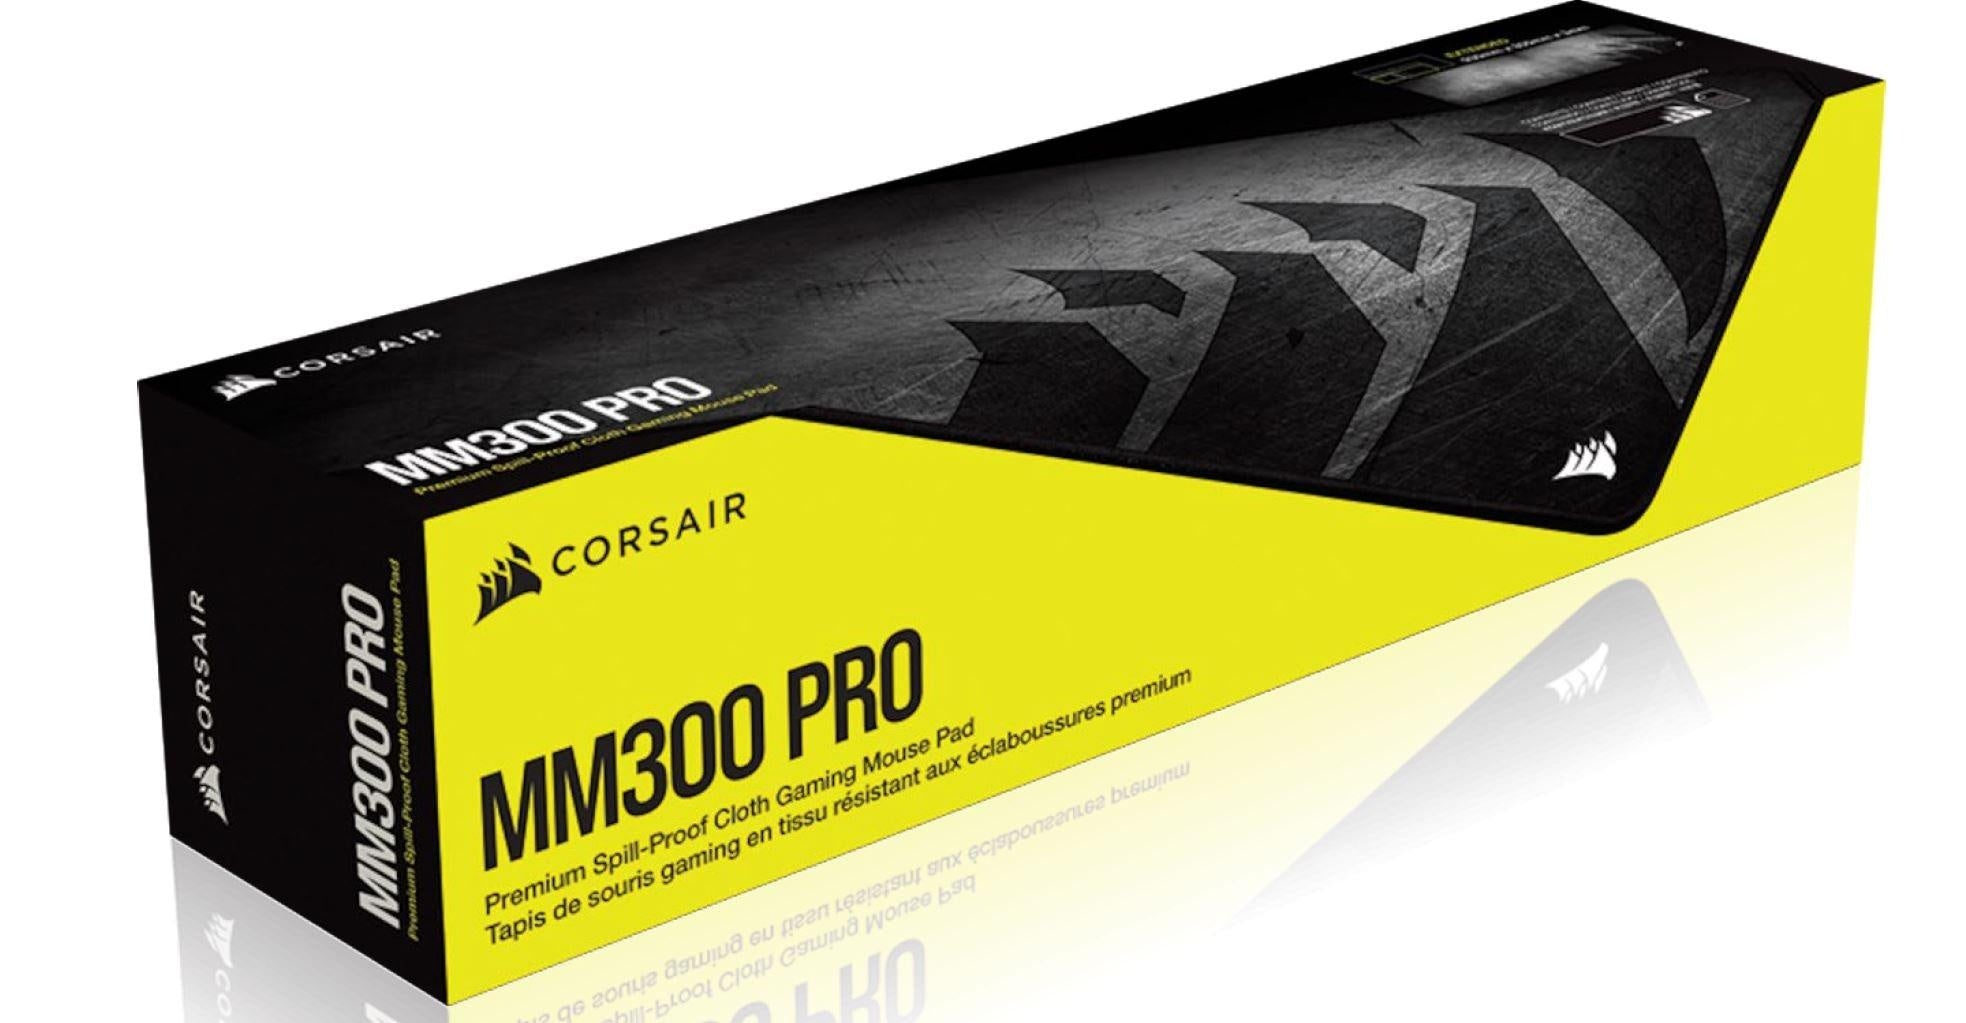 CORSAIR MM300 PRO Premium Spill-Proof Cloth Gaming Mouse Pad â€“ Extended 930mm x 300mm x 3mm - Graphic Surface CORSAIR